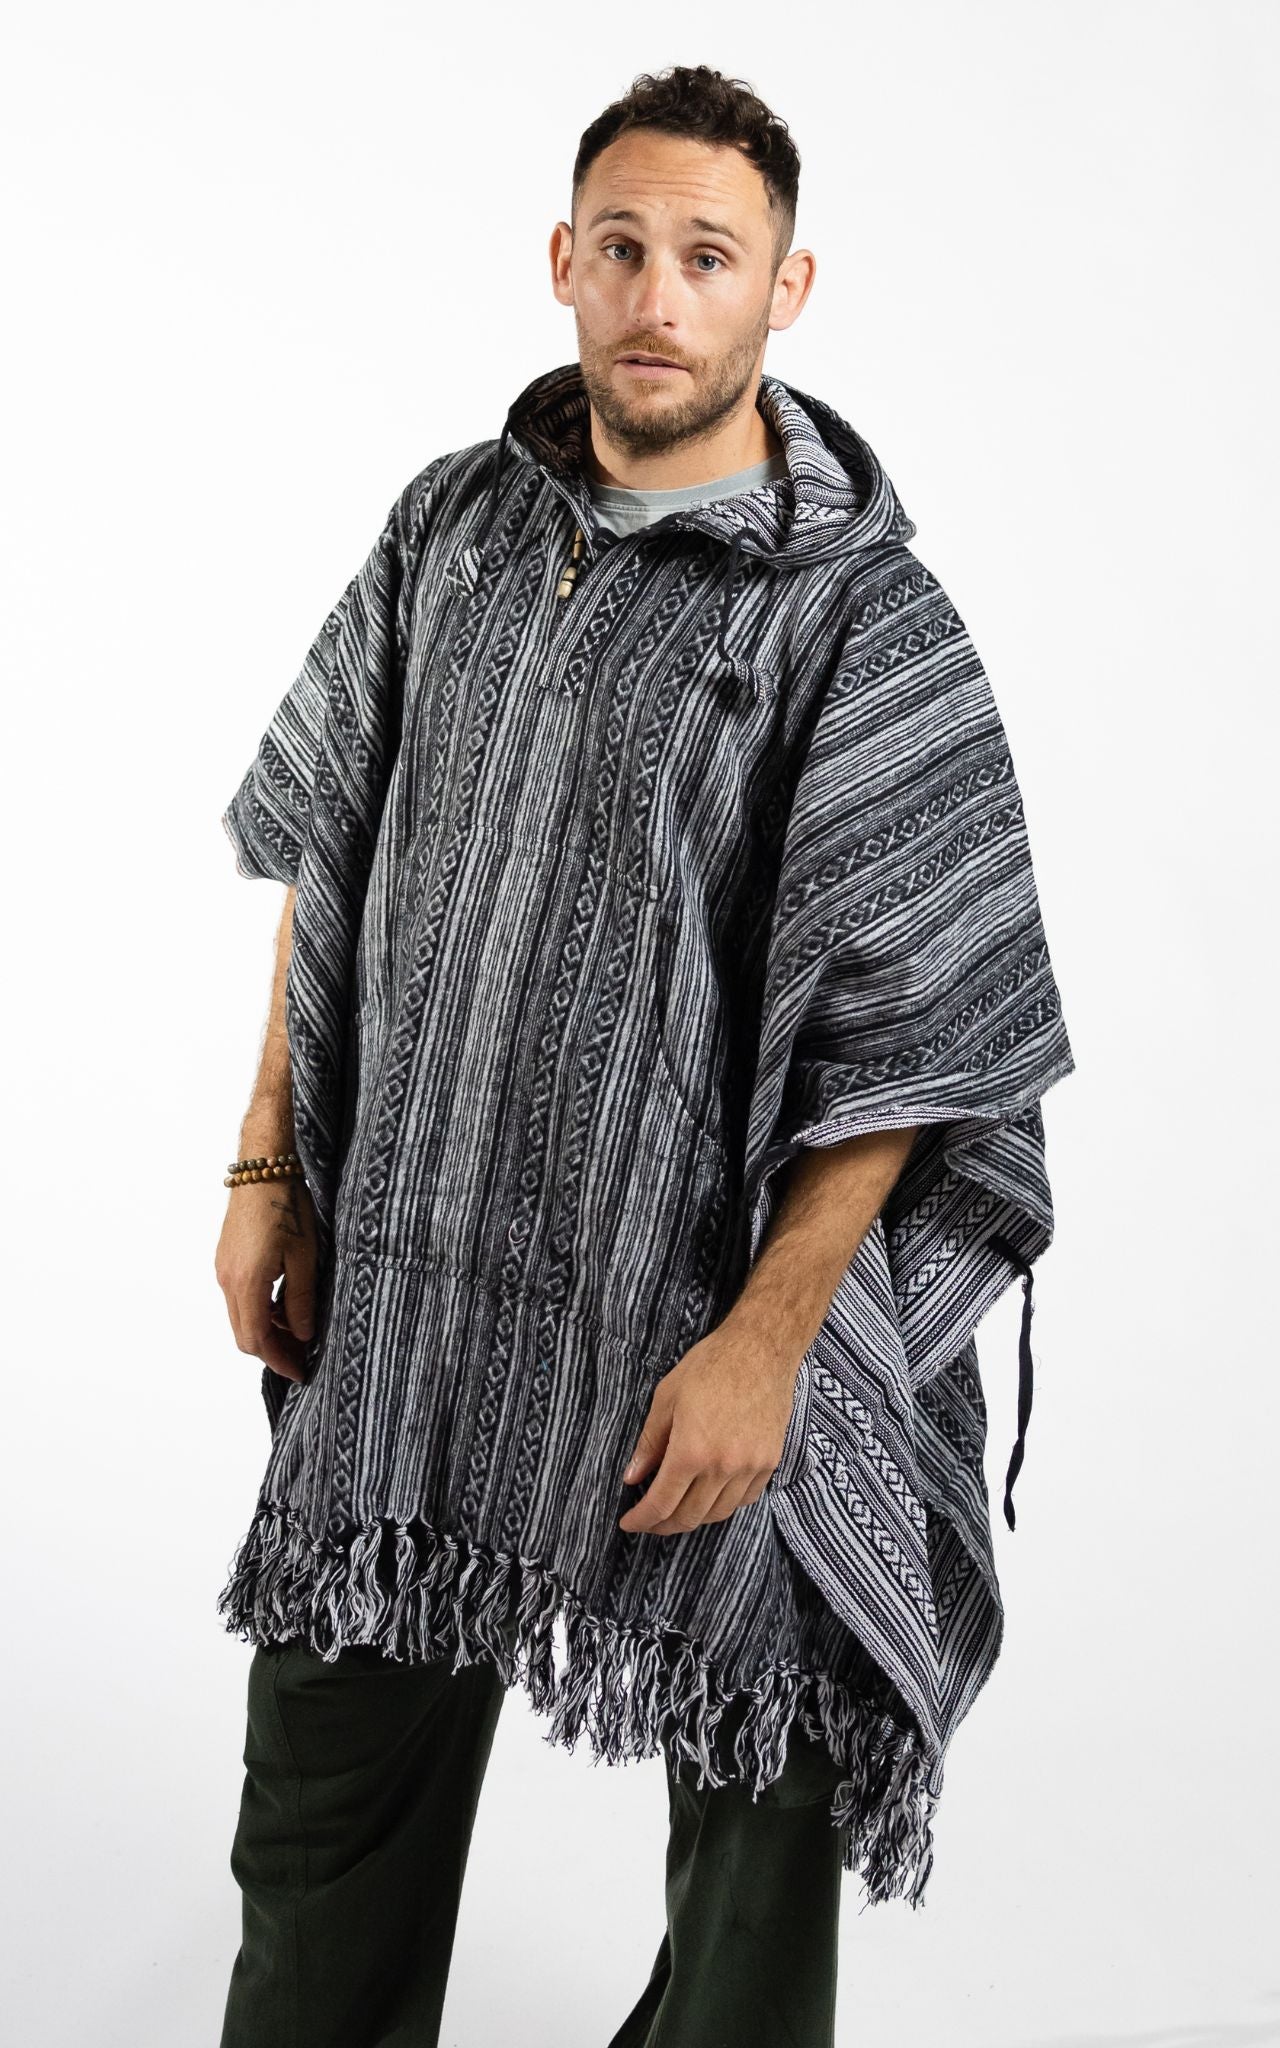 Surya Thick, Heavy Cotton Festival Poncho made in Nepal - Black